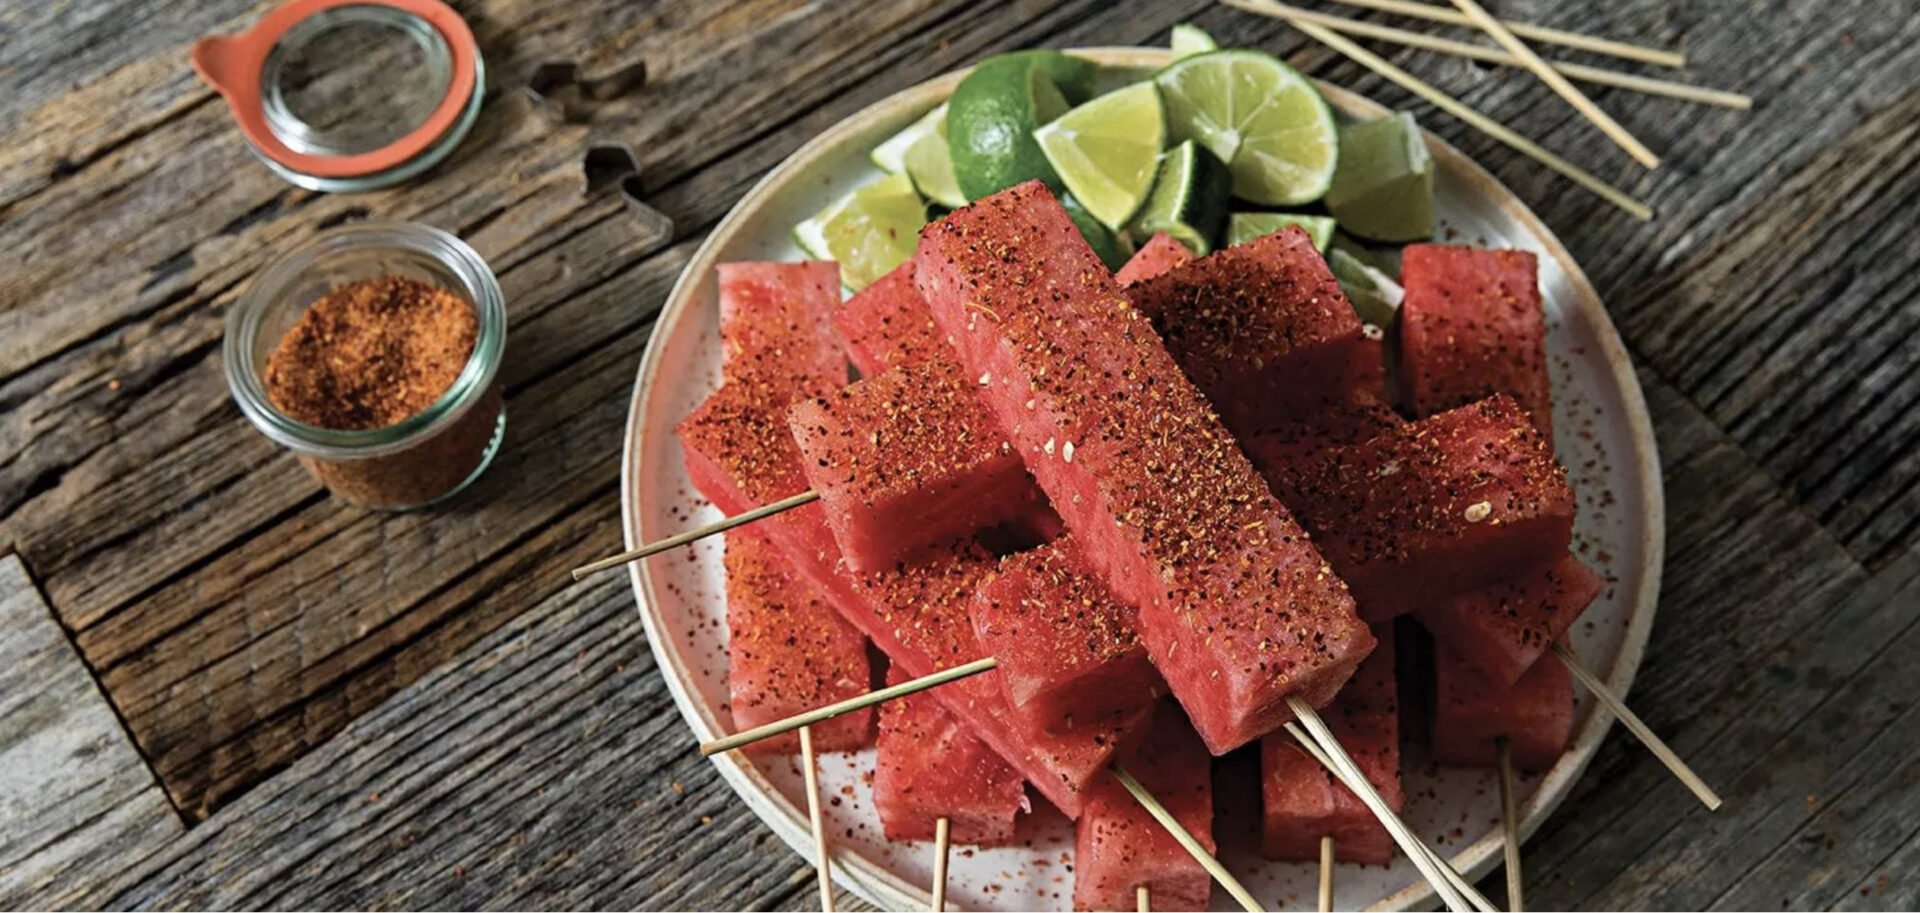 Watermelon skewers and lime wedges on a plate for the Fourth of July